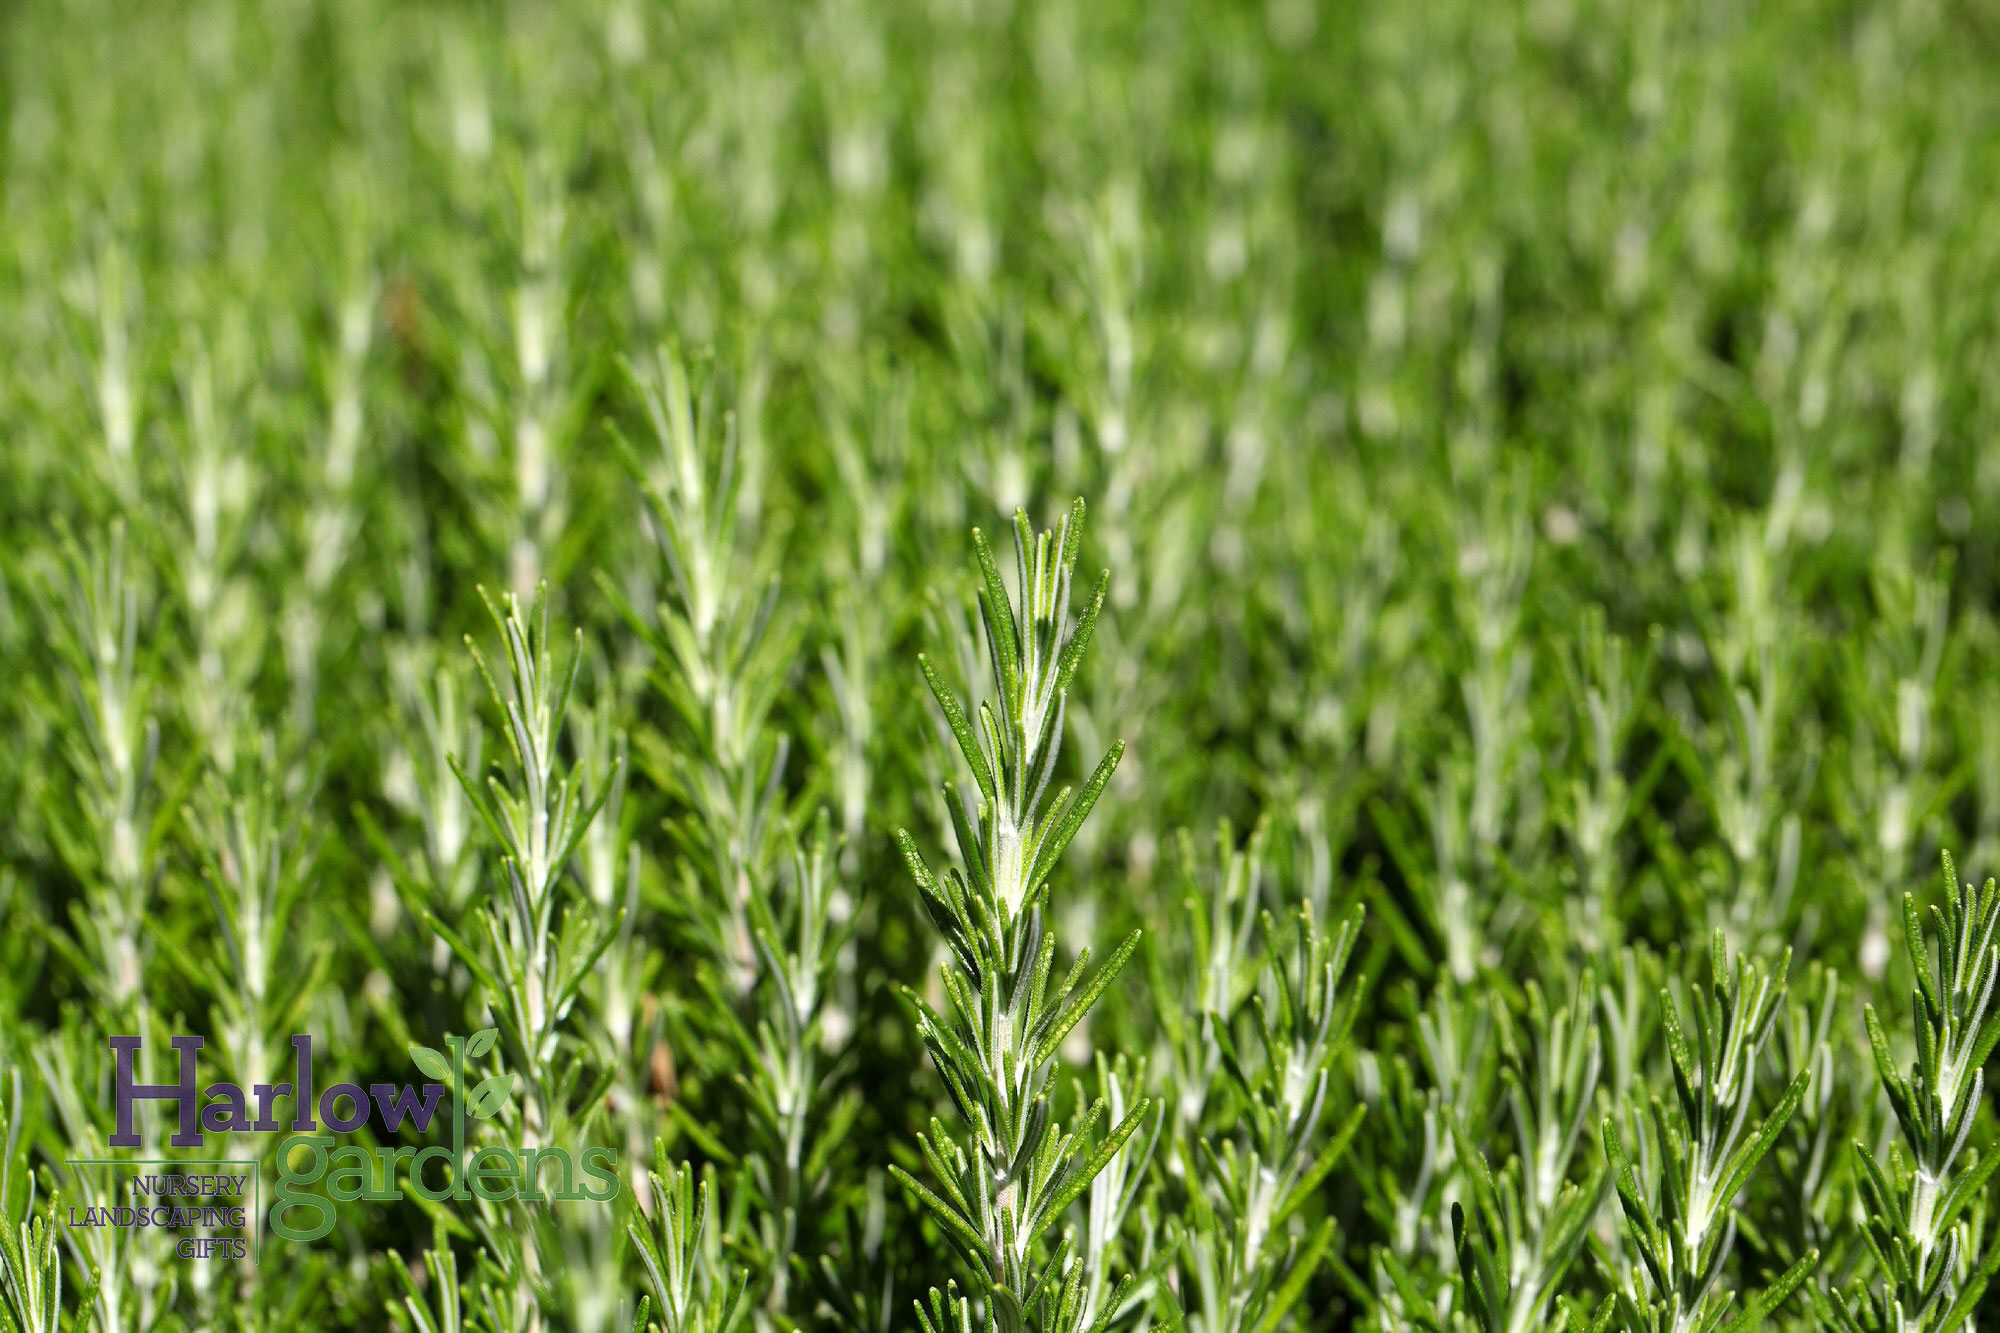 Upright Rosemary for sale at Harlow Gardens Tucson.